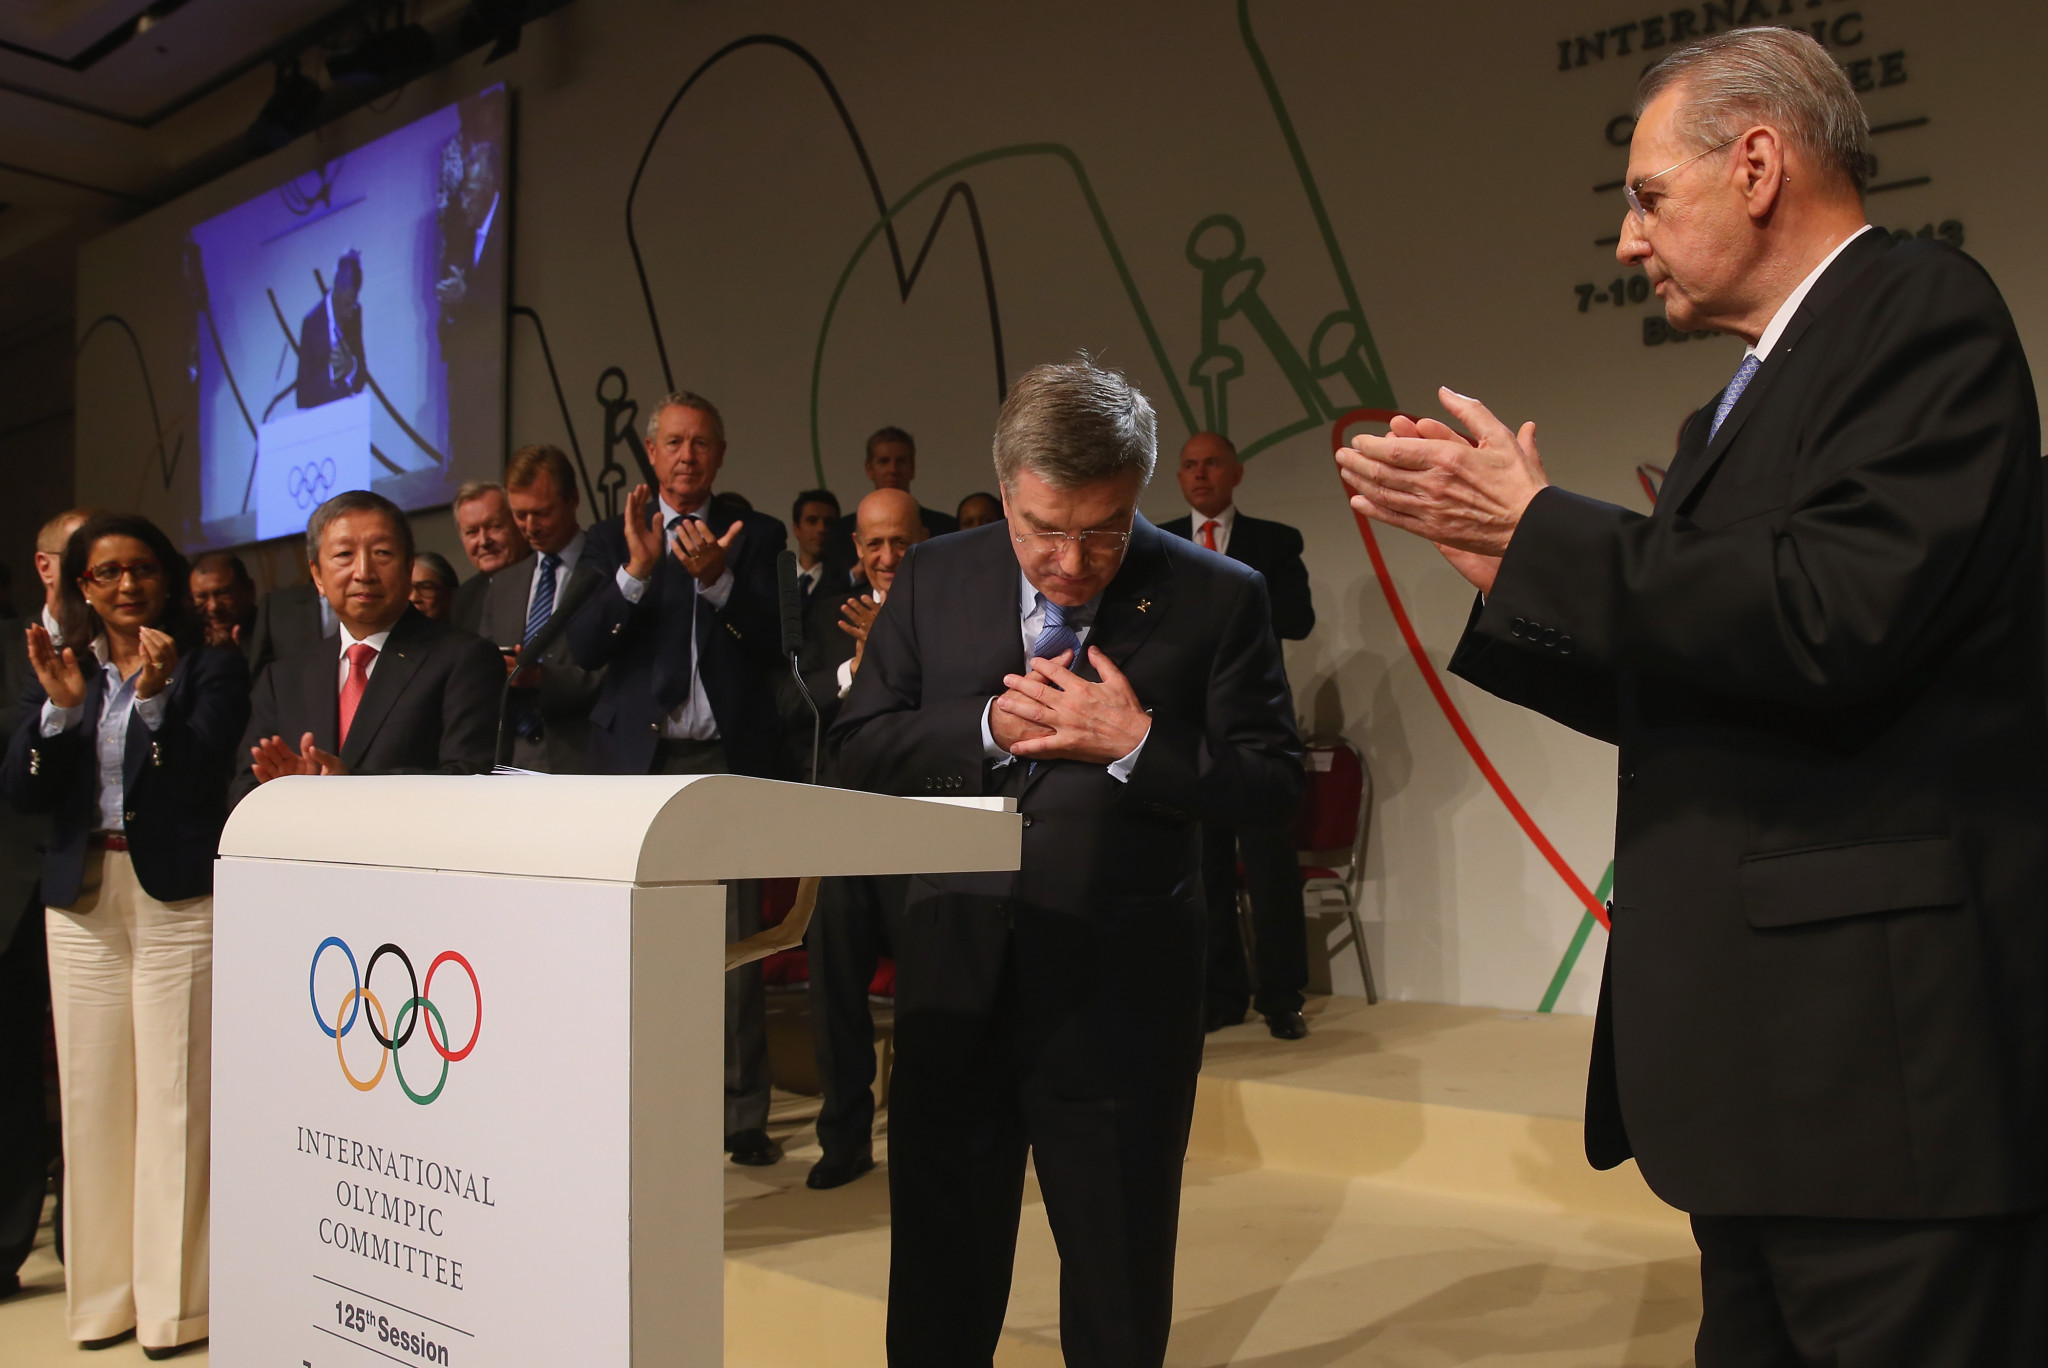 Thomas Bach accepts the congratulations after being elected President at the IOC Session in Buenos Aires ©Getty Images